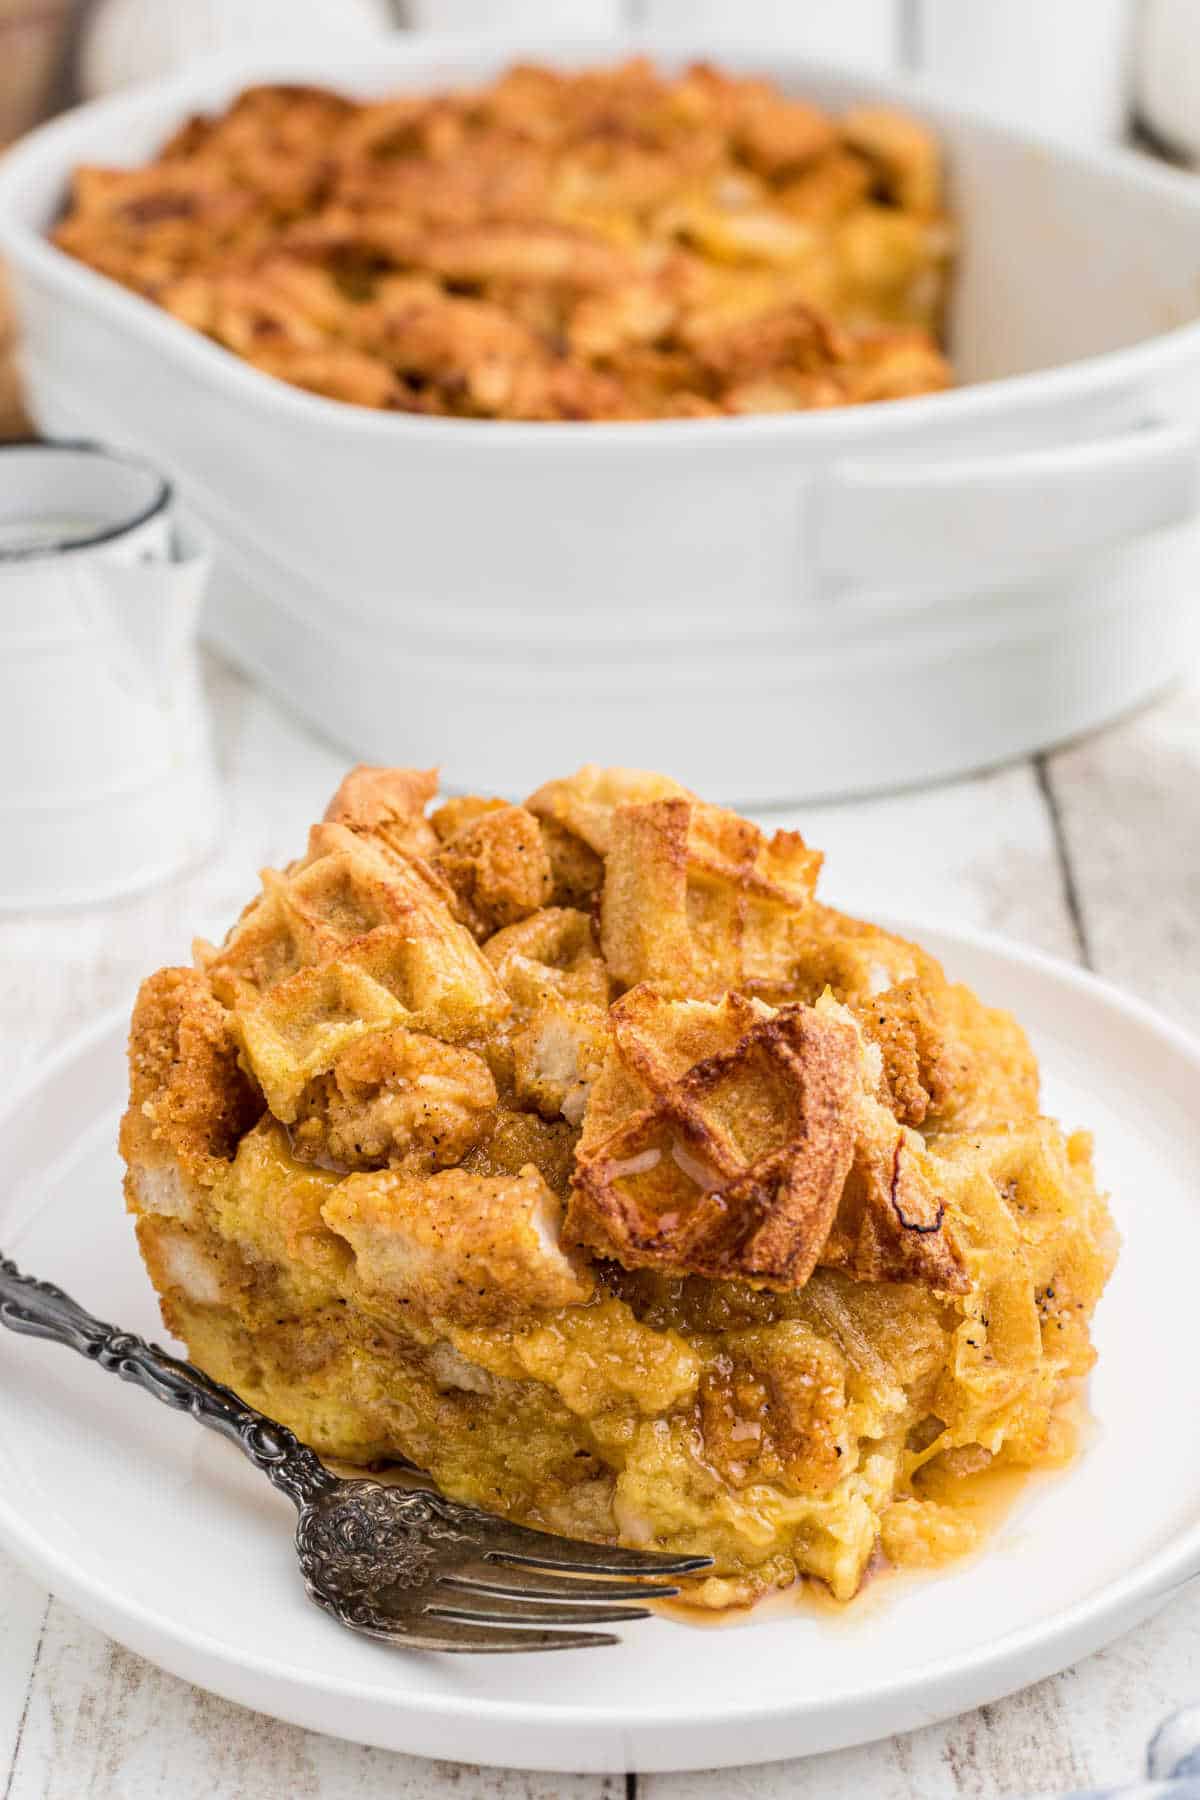 A plate of chicken and waffle casserole recipe with a fork next to it.